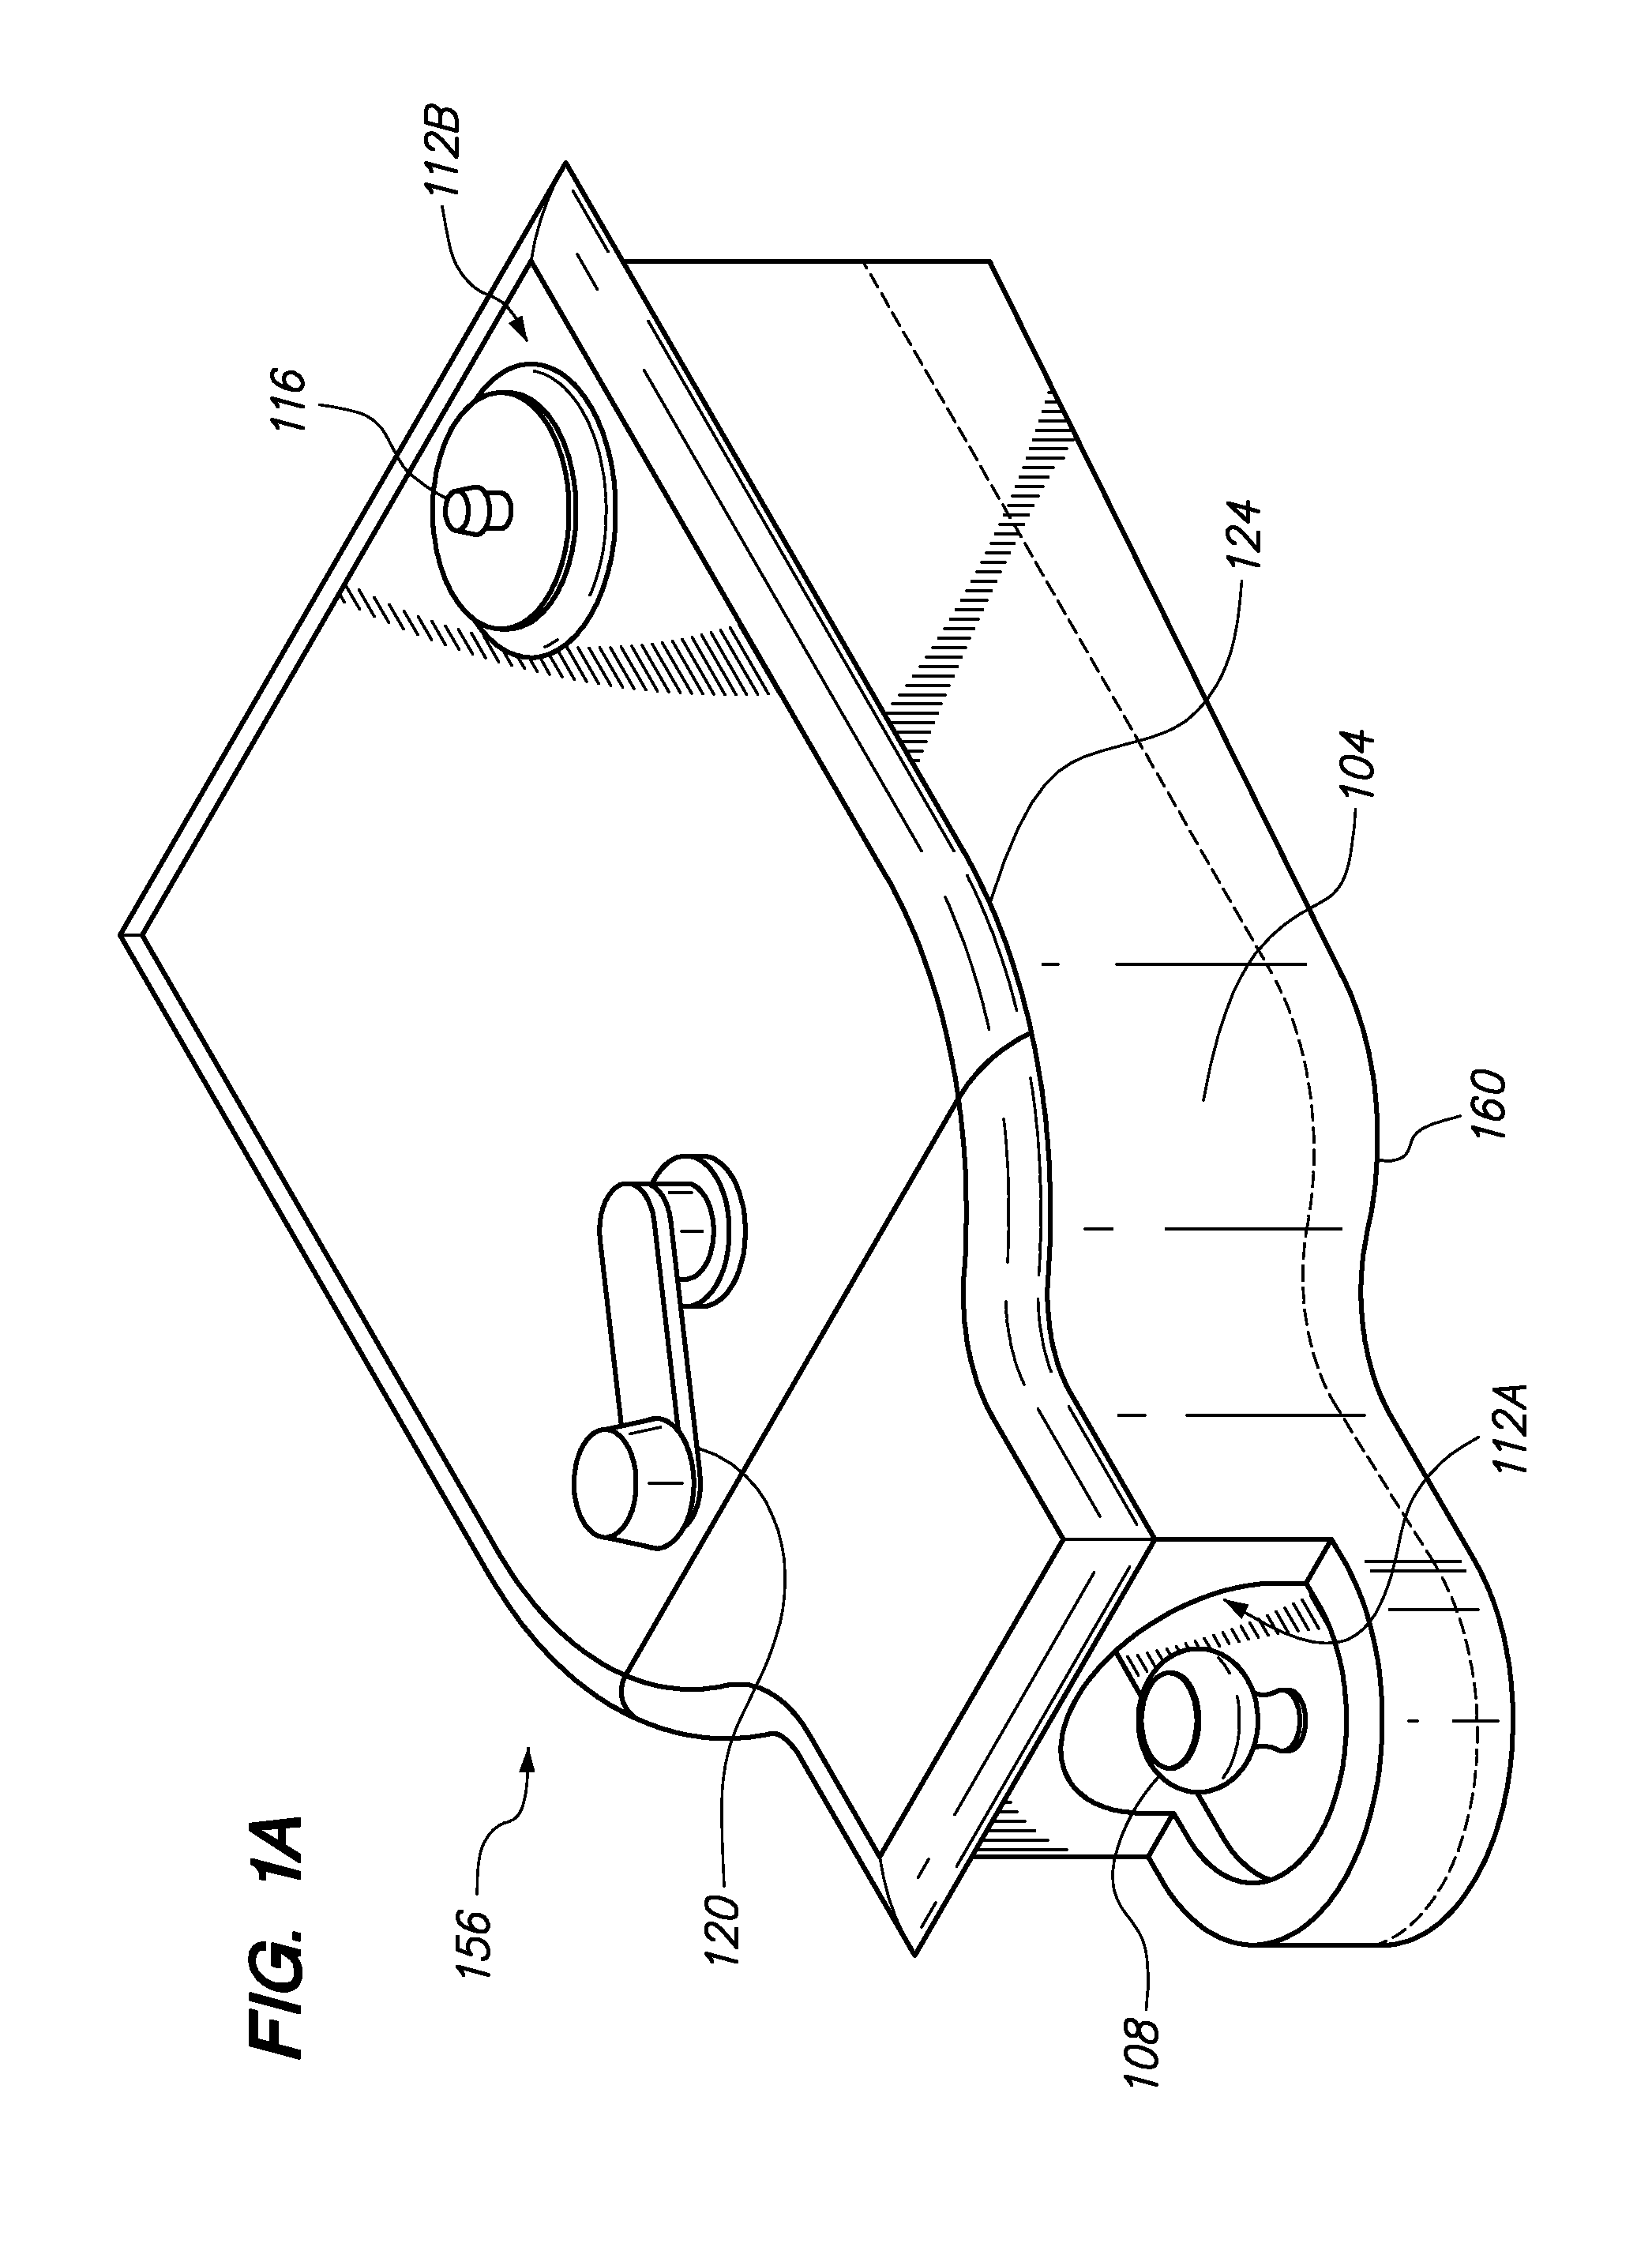 Billiard ball mixing device and wagering game